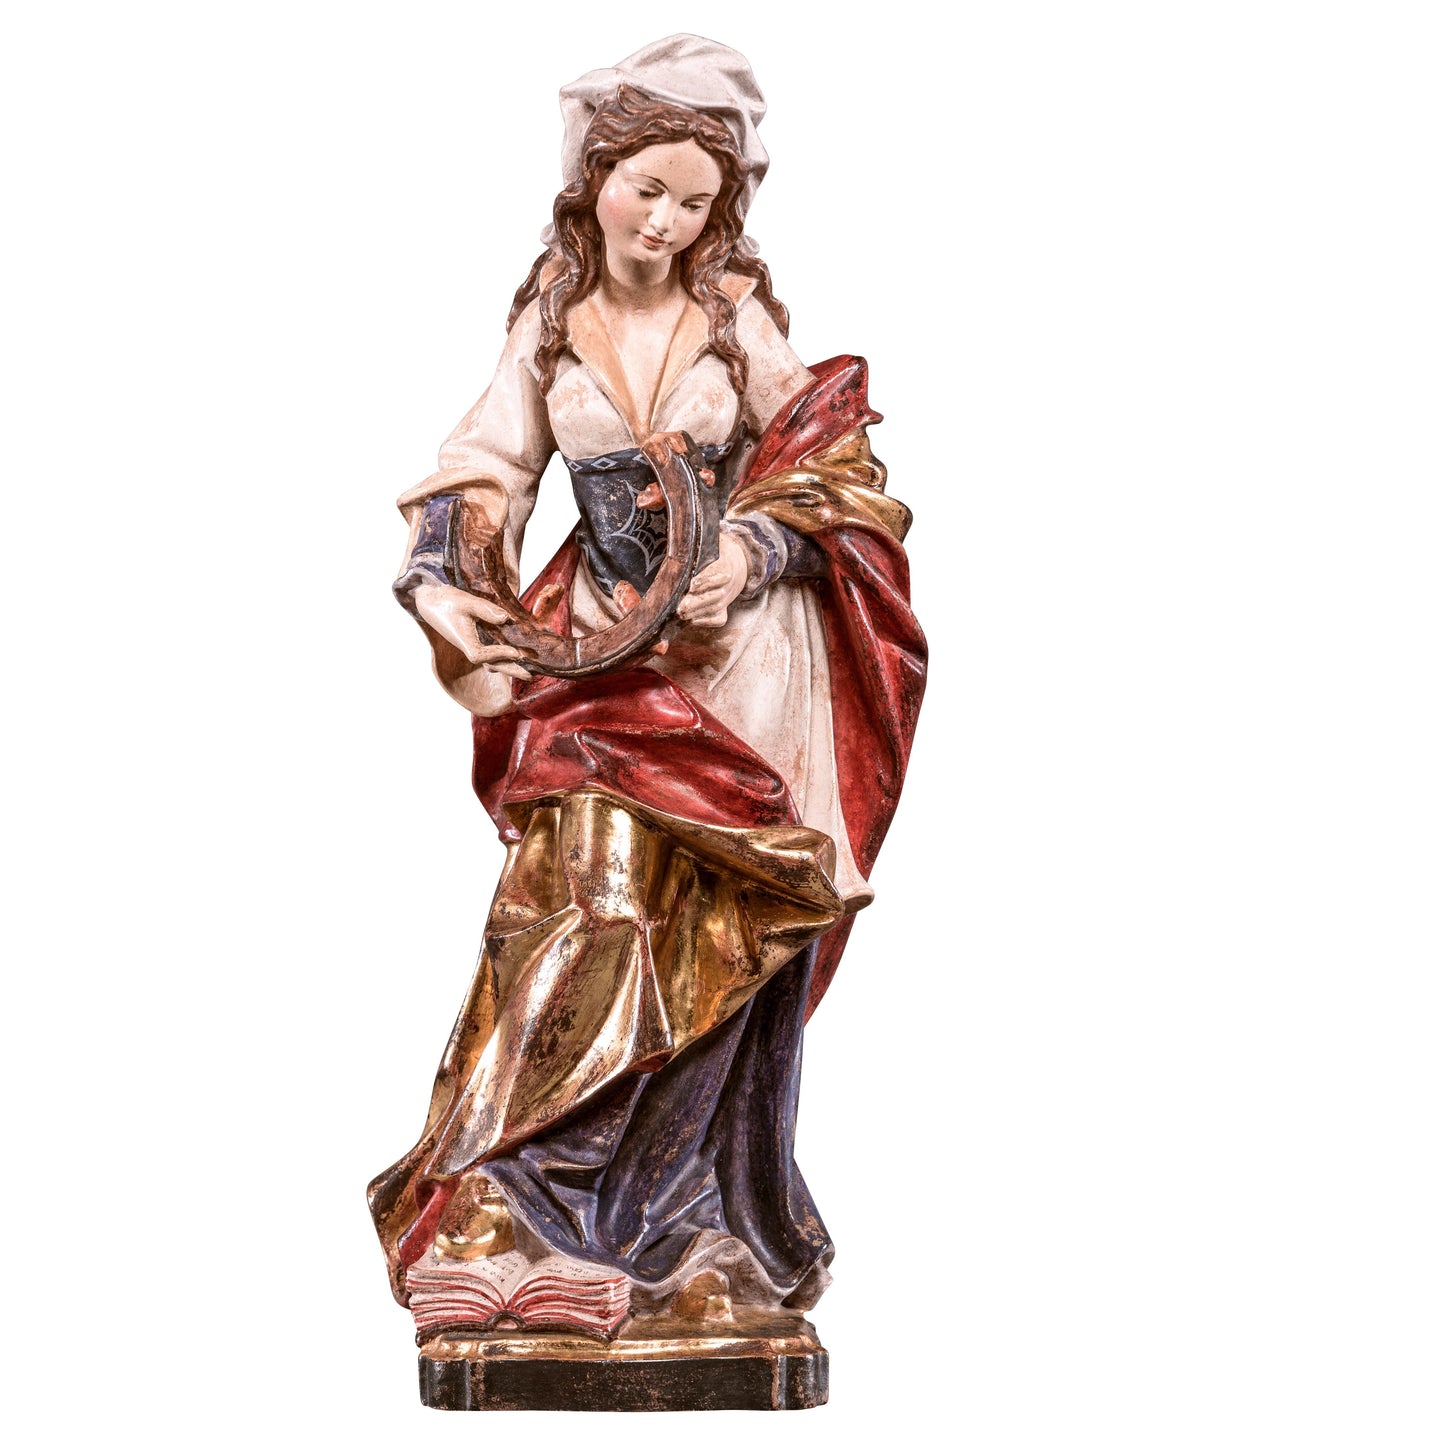 Mondo Cattolico Golden / 40 cm (15.7 in) Wooden statue of St. Catherine